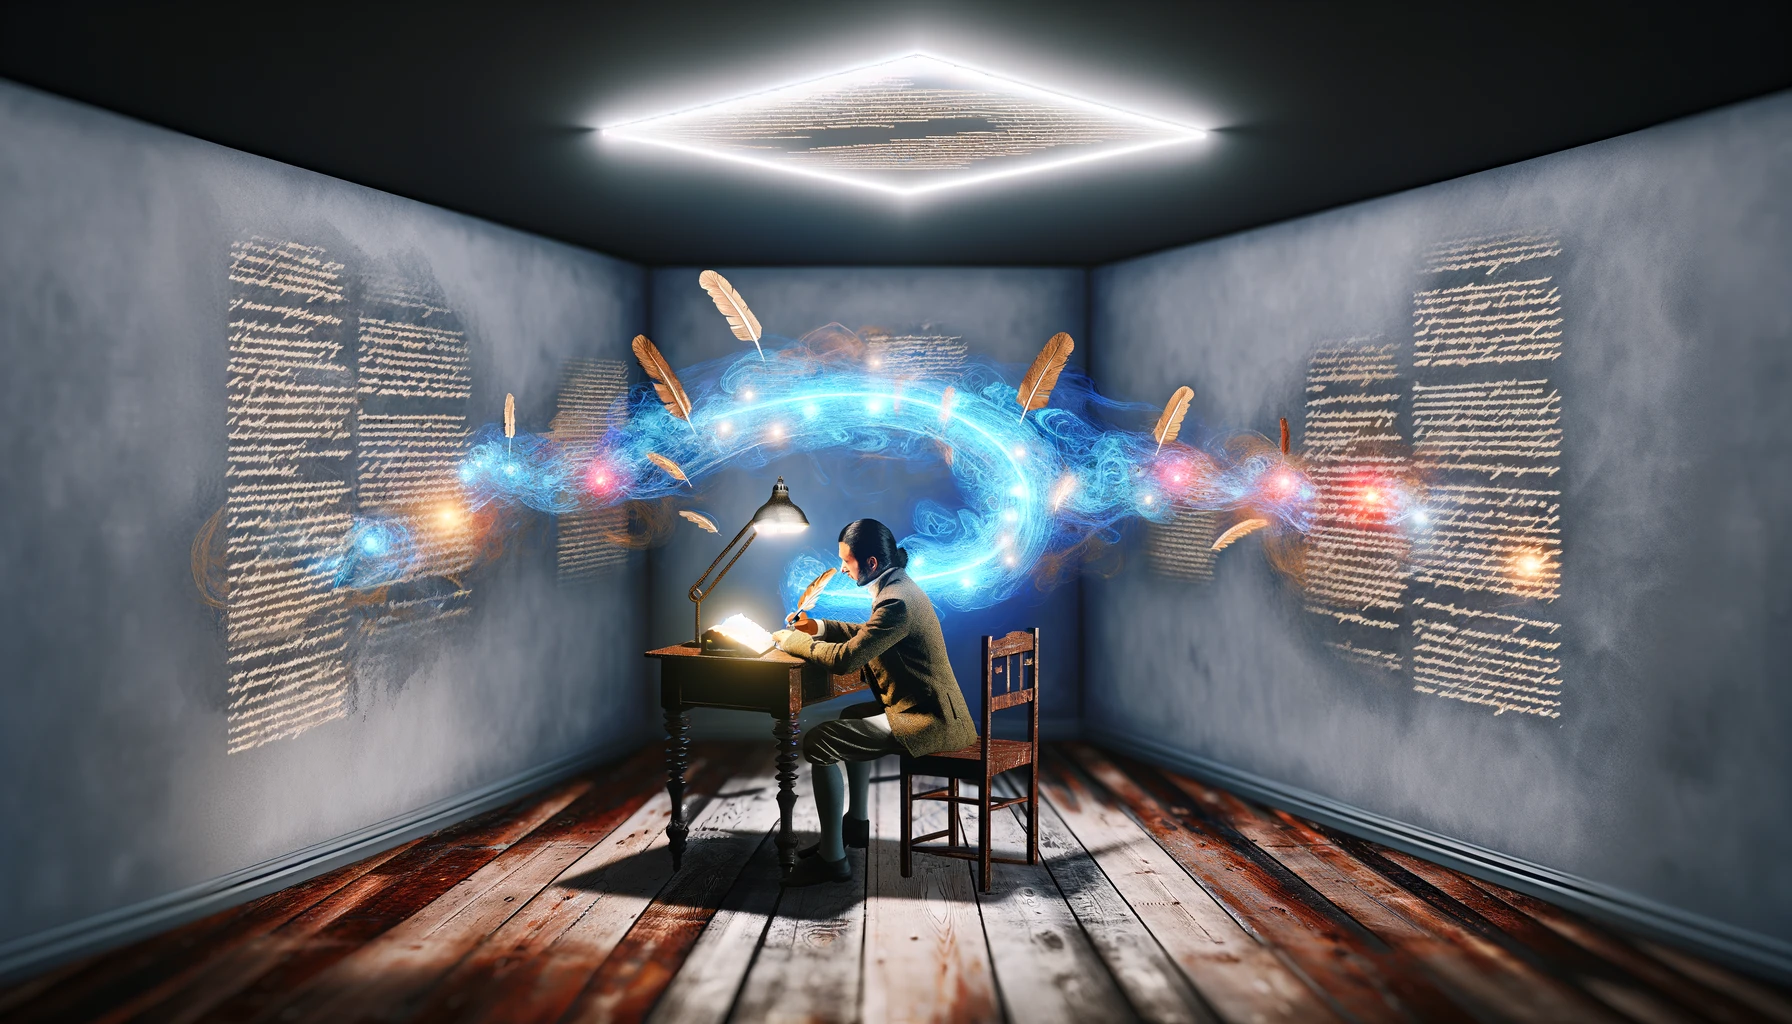 A serene and imaginative moment of creativity captured in a room where traditional and futuristic elements blend. A person sits at a dark wood desk, deeply focused on writing with a classic quill pen. Above the desk, a modern, sleek lamp emits bright red light, while a holographic display projects swirling texts and images in blue and yellow. The room's walls are light gray, symbolizing a harmonious blend of the past and the future. This image highlights the human element in writing during the age of generative AI, focusing on the intimate and creative process.